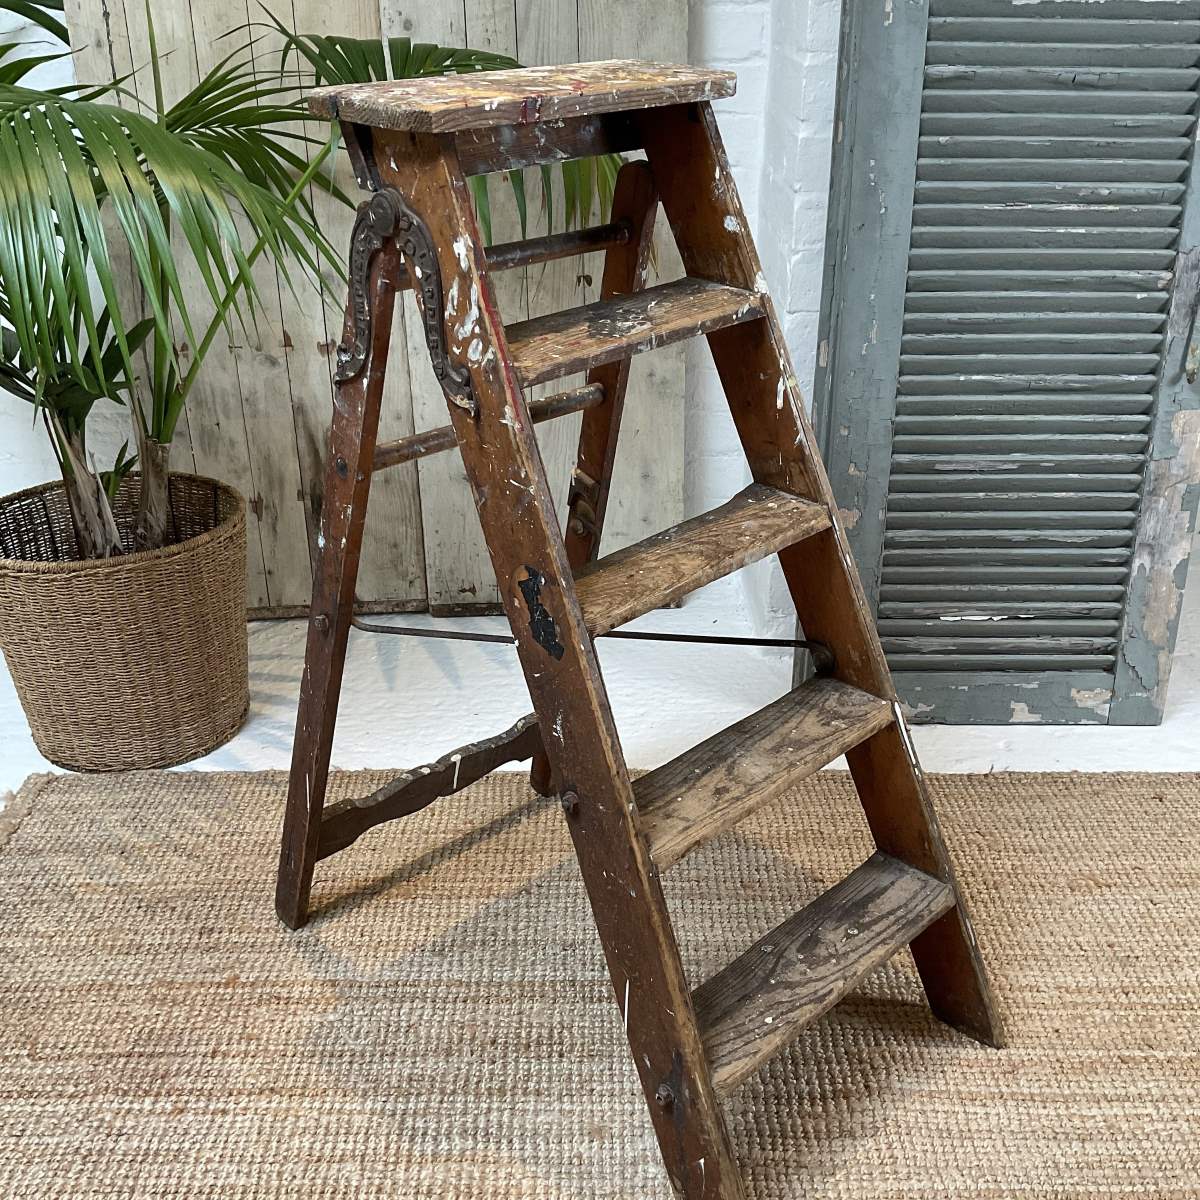 Where Can I Buy An Old Wooden Ladder